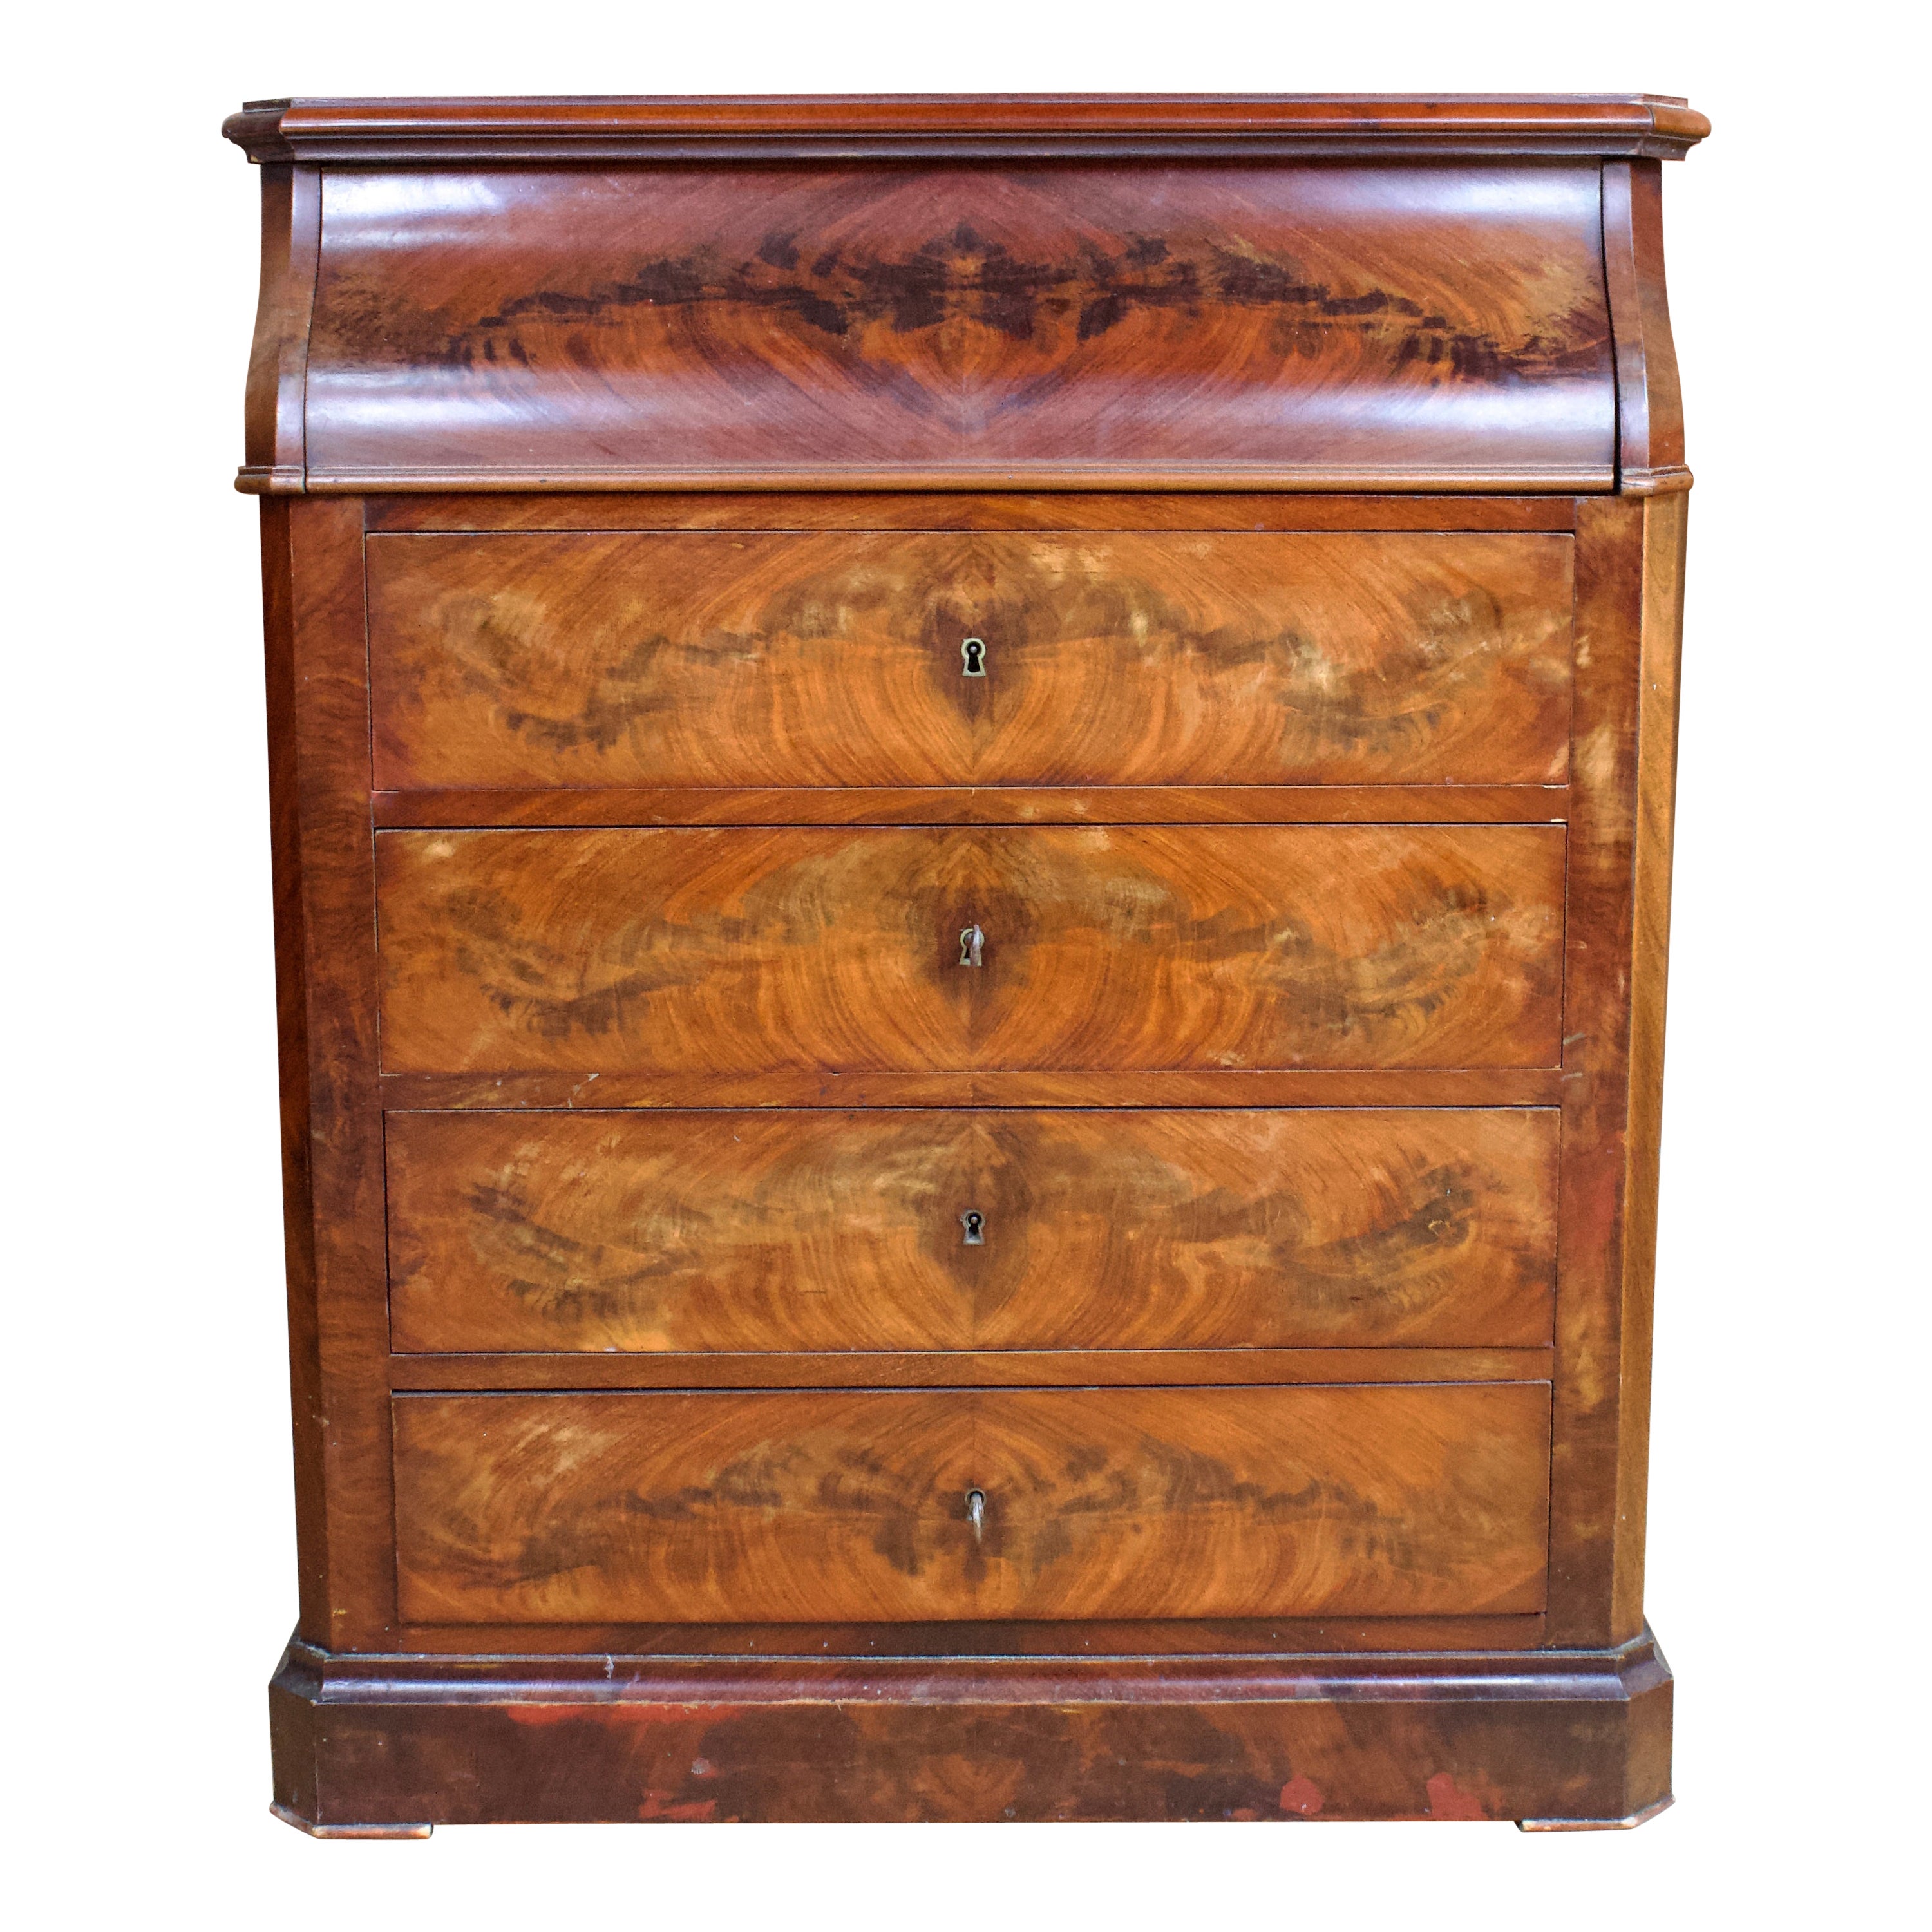 Toilet Commode Mahogany and Marble Vanity Louis Philippe Period 19th Century